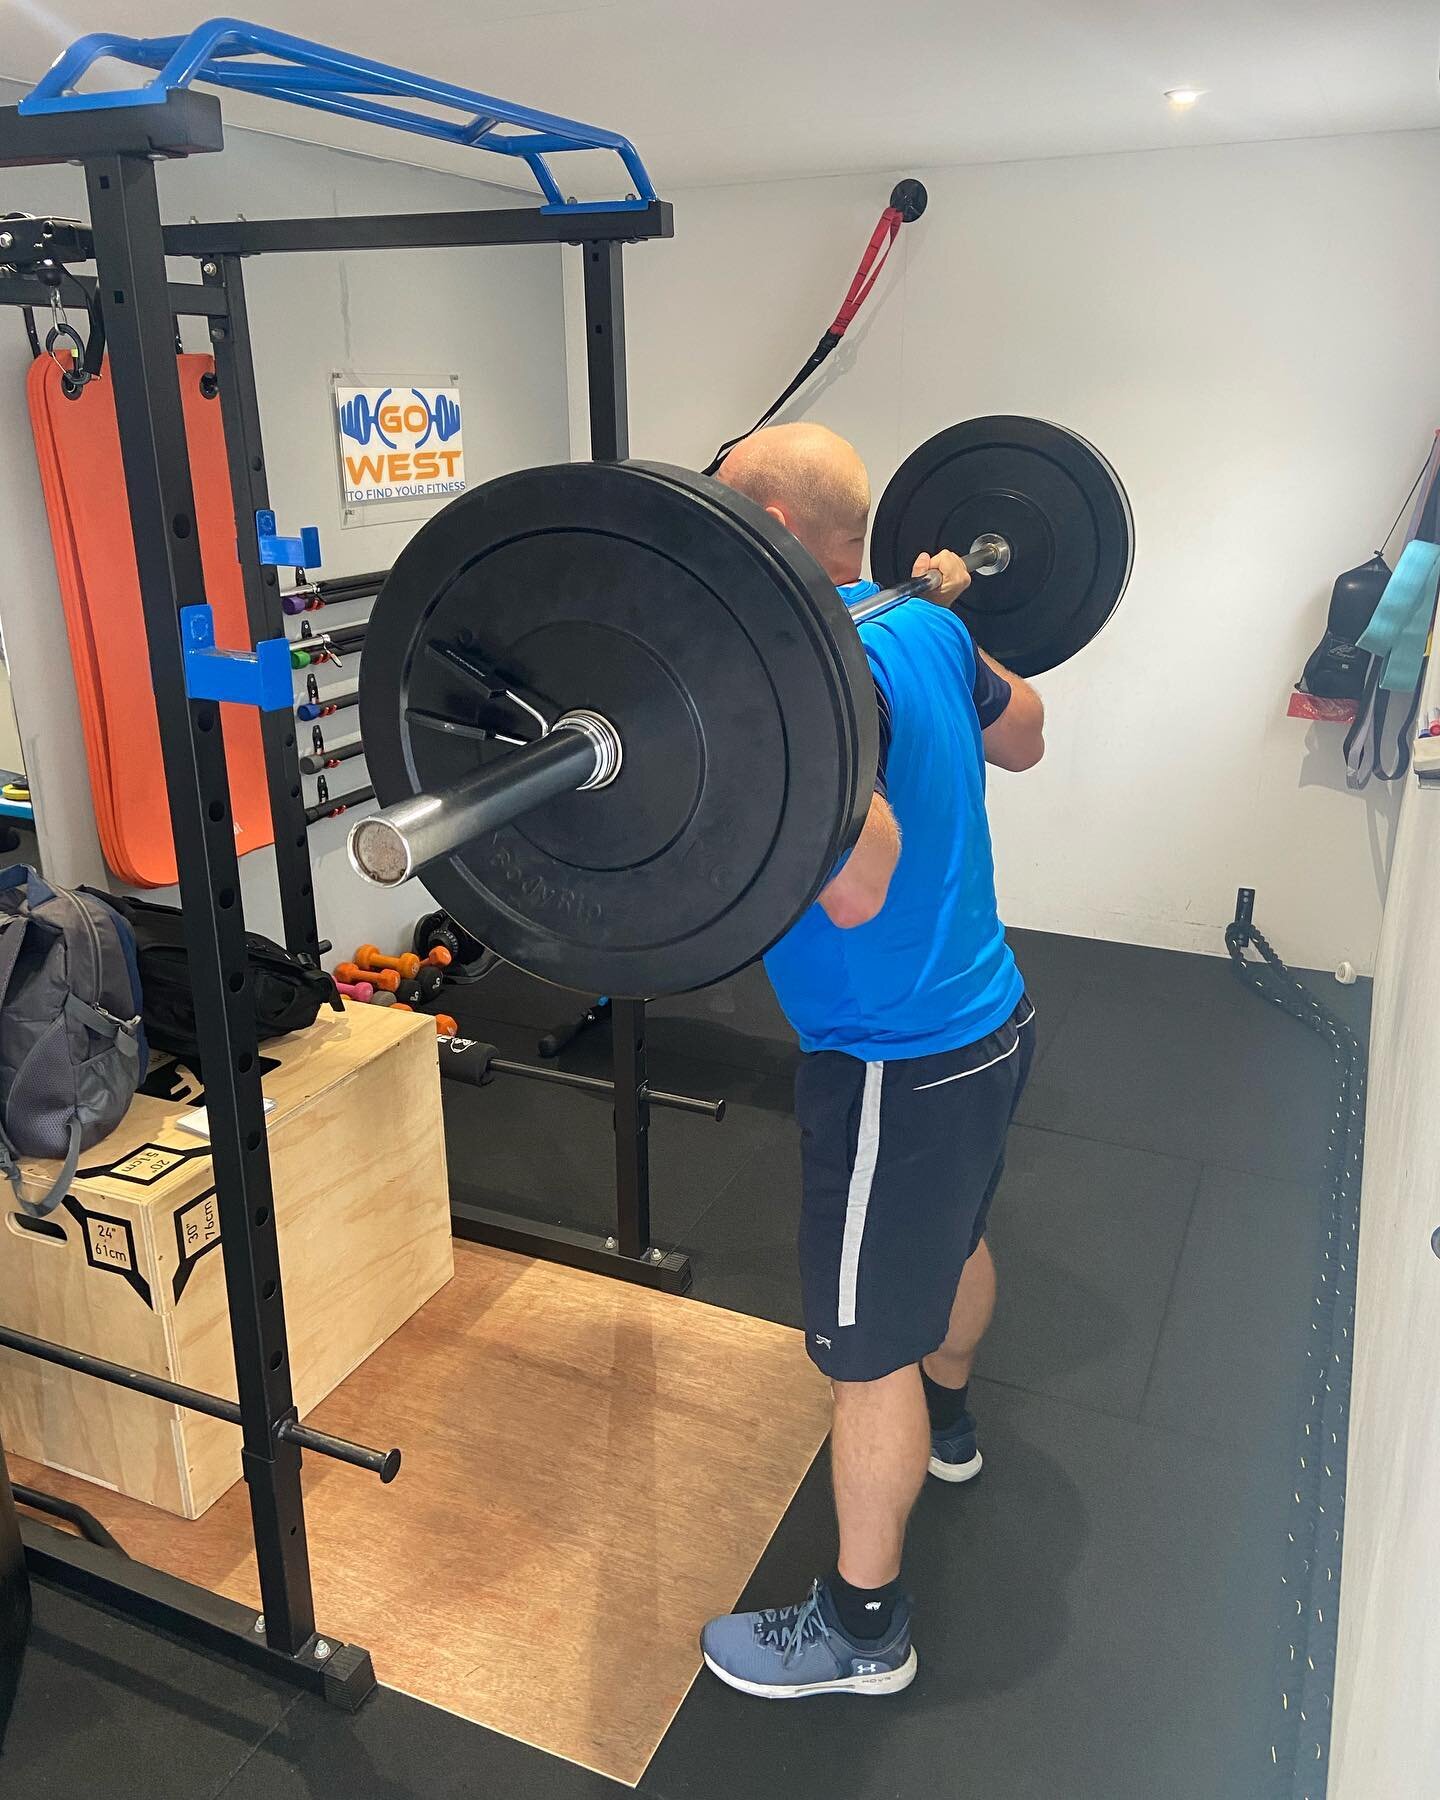 Joycey having some fun with the bumper plates tonight 😂 

This man has had several knee operations yet with some work on techniques and building up over the past few months he&rsquo;s comfortably squatting and with 70kg on his back for 6 reps 👌